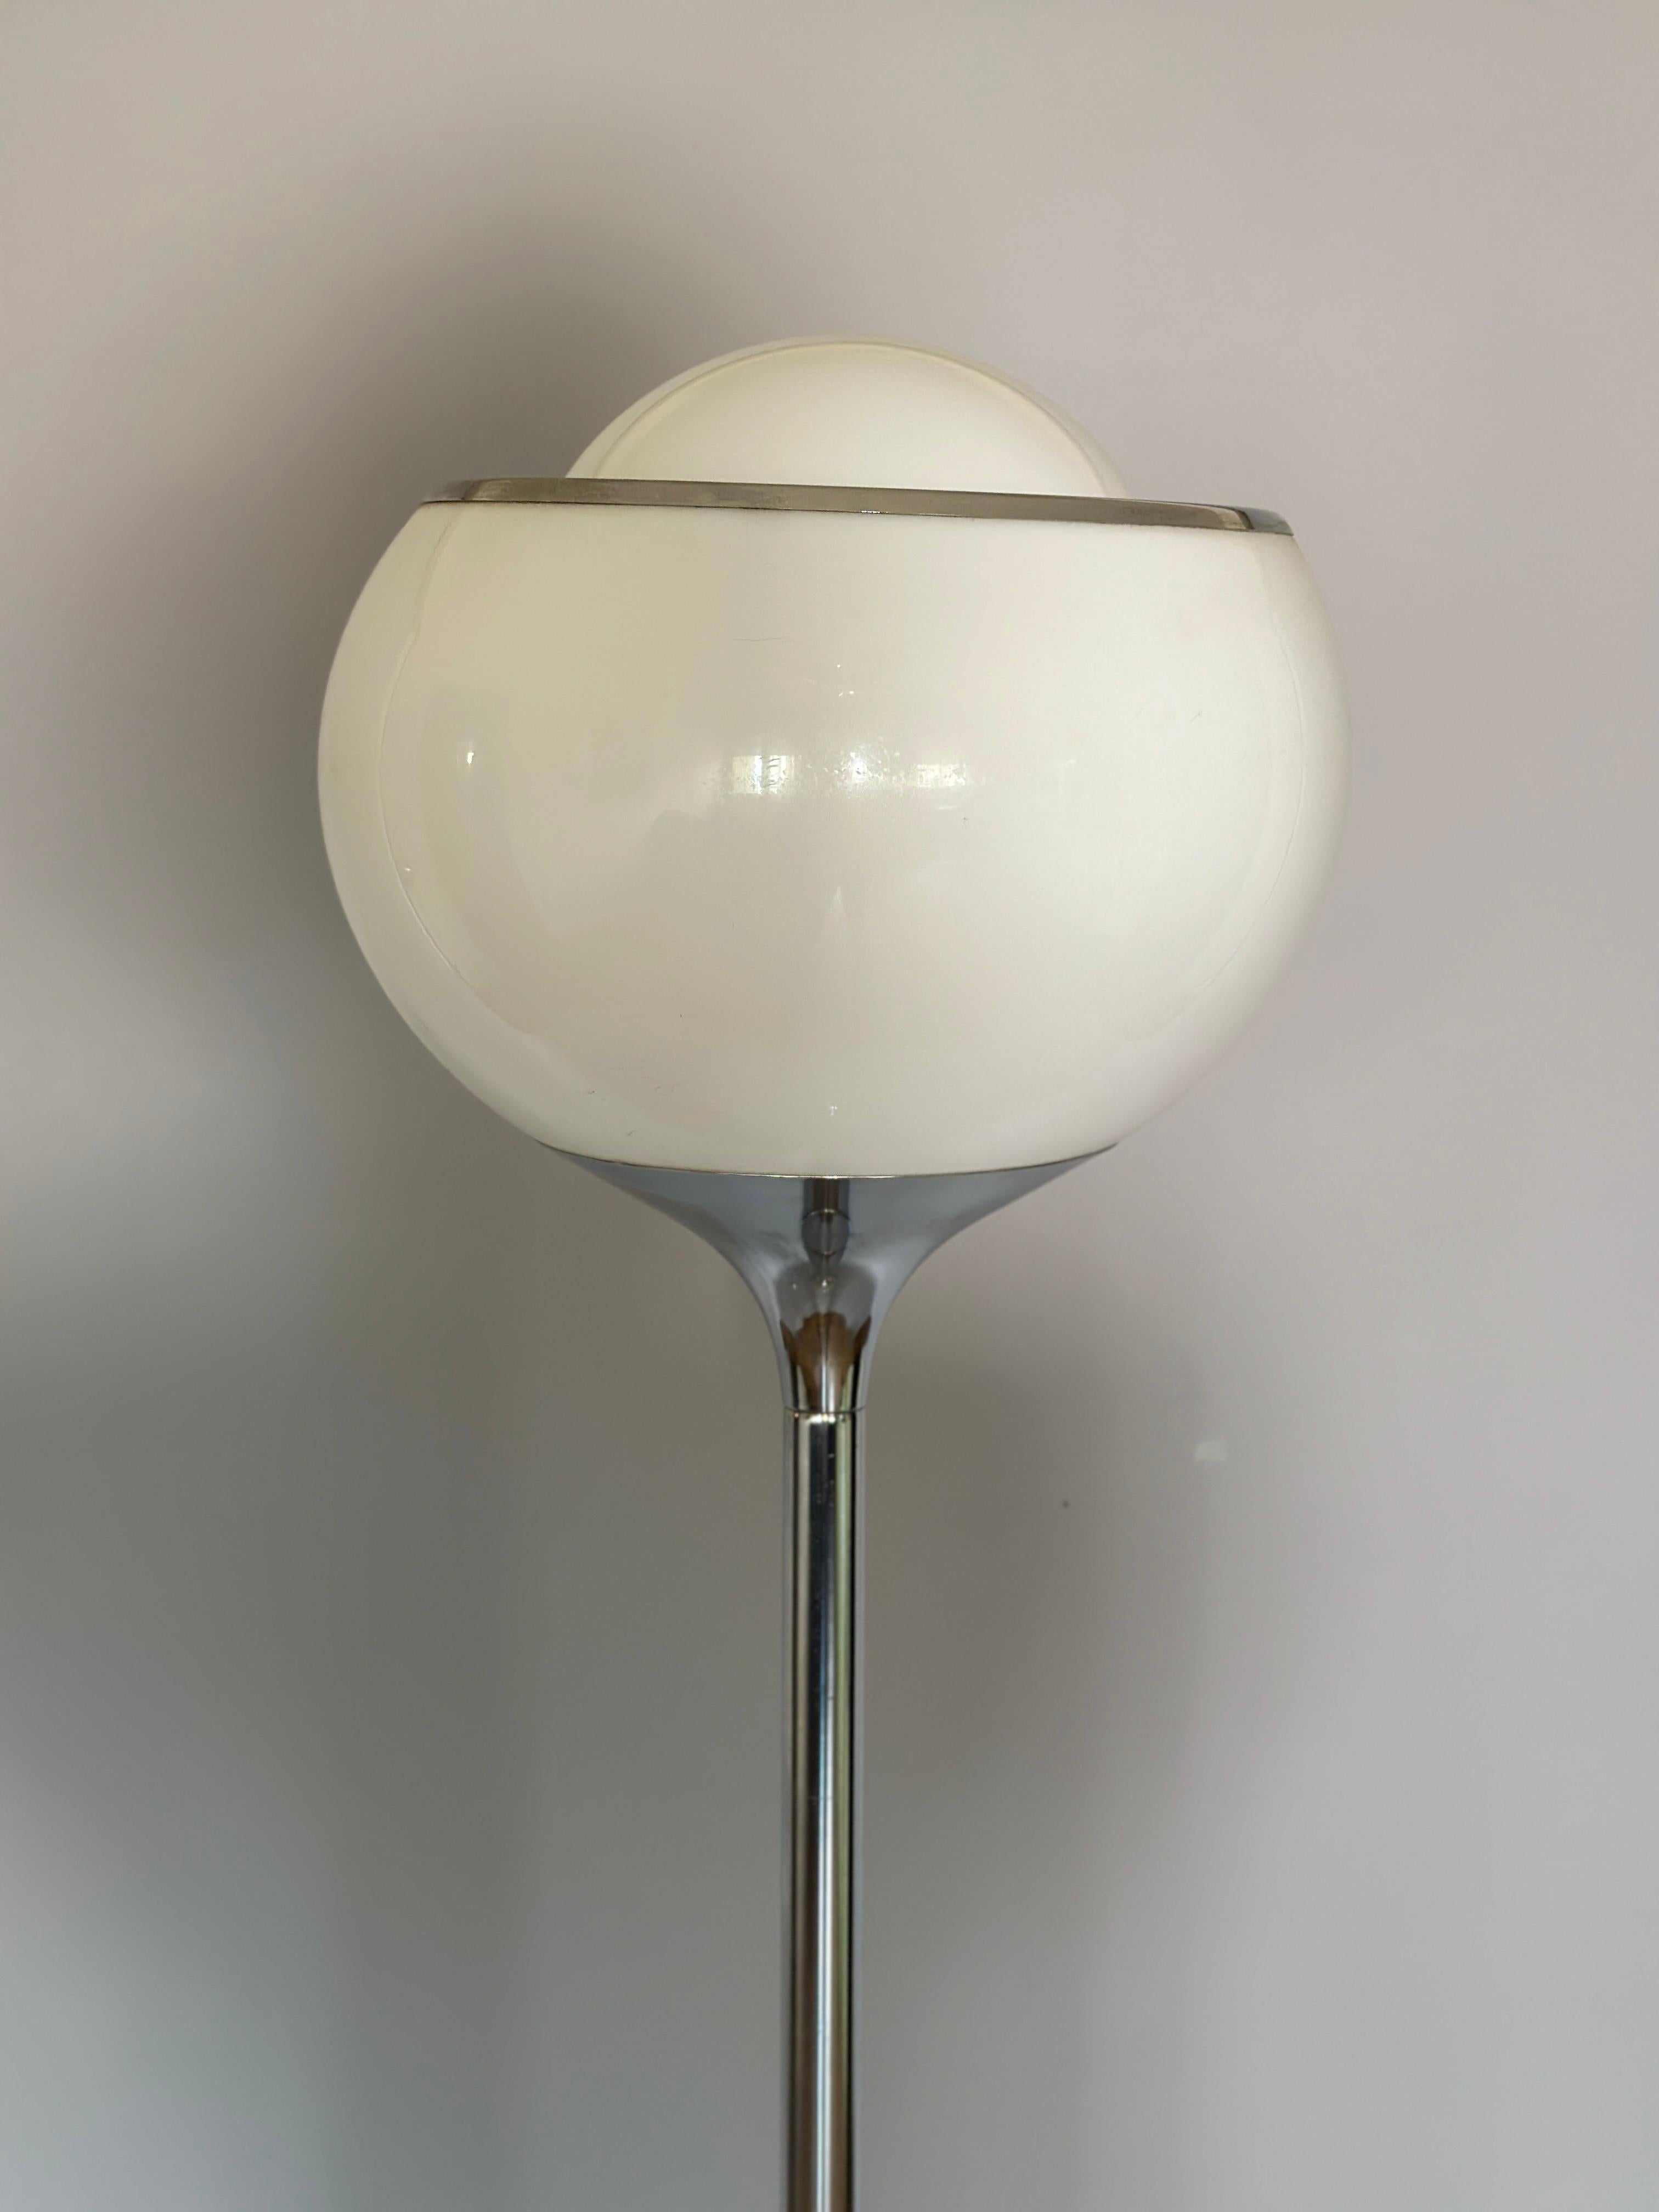 Amazing Bub floor lamp by Guzzini for Meblo.Designed in the 1968 and made in 70s.Made from plastic shade and chrome plate.